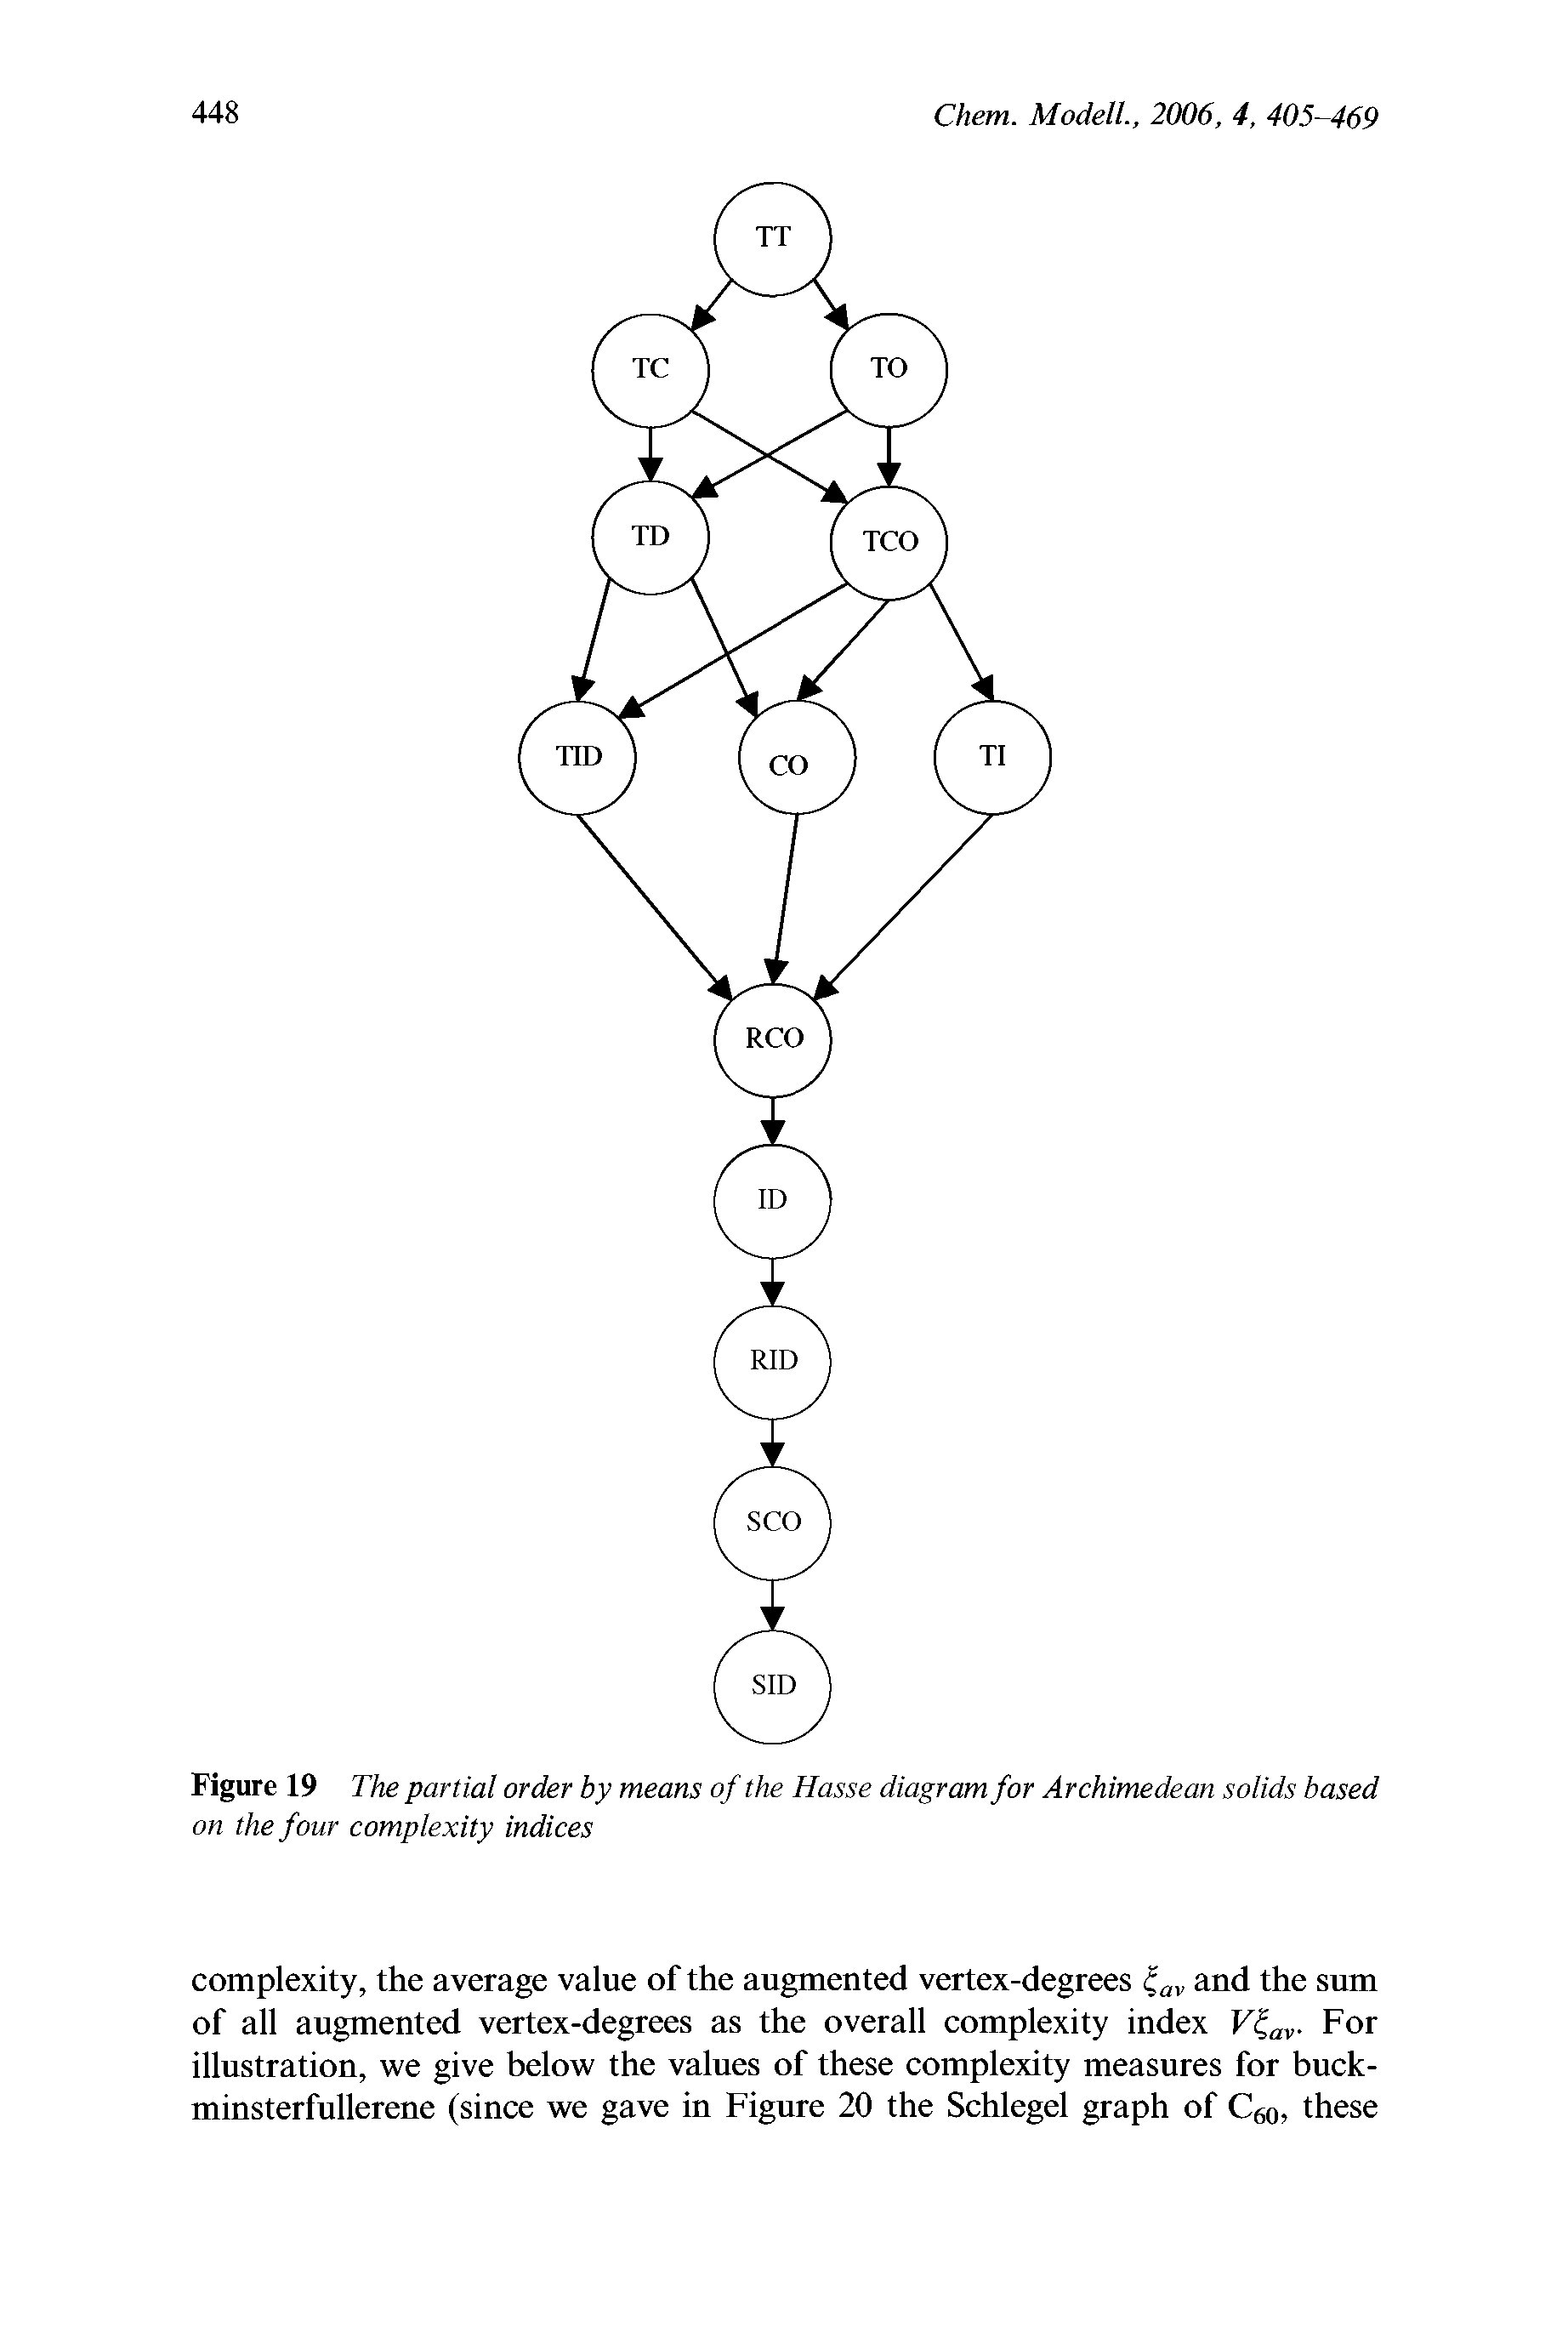 Figure 19 The partial order by means of the Hasse diagram for Archimedean solids based on the four complexity indices...